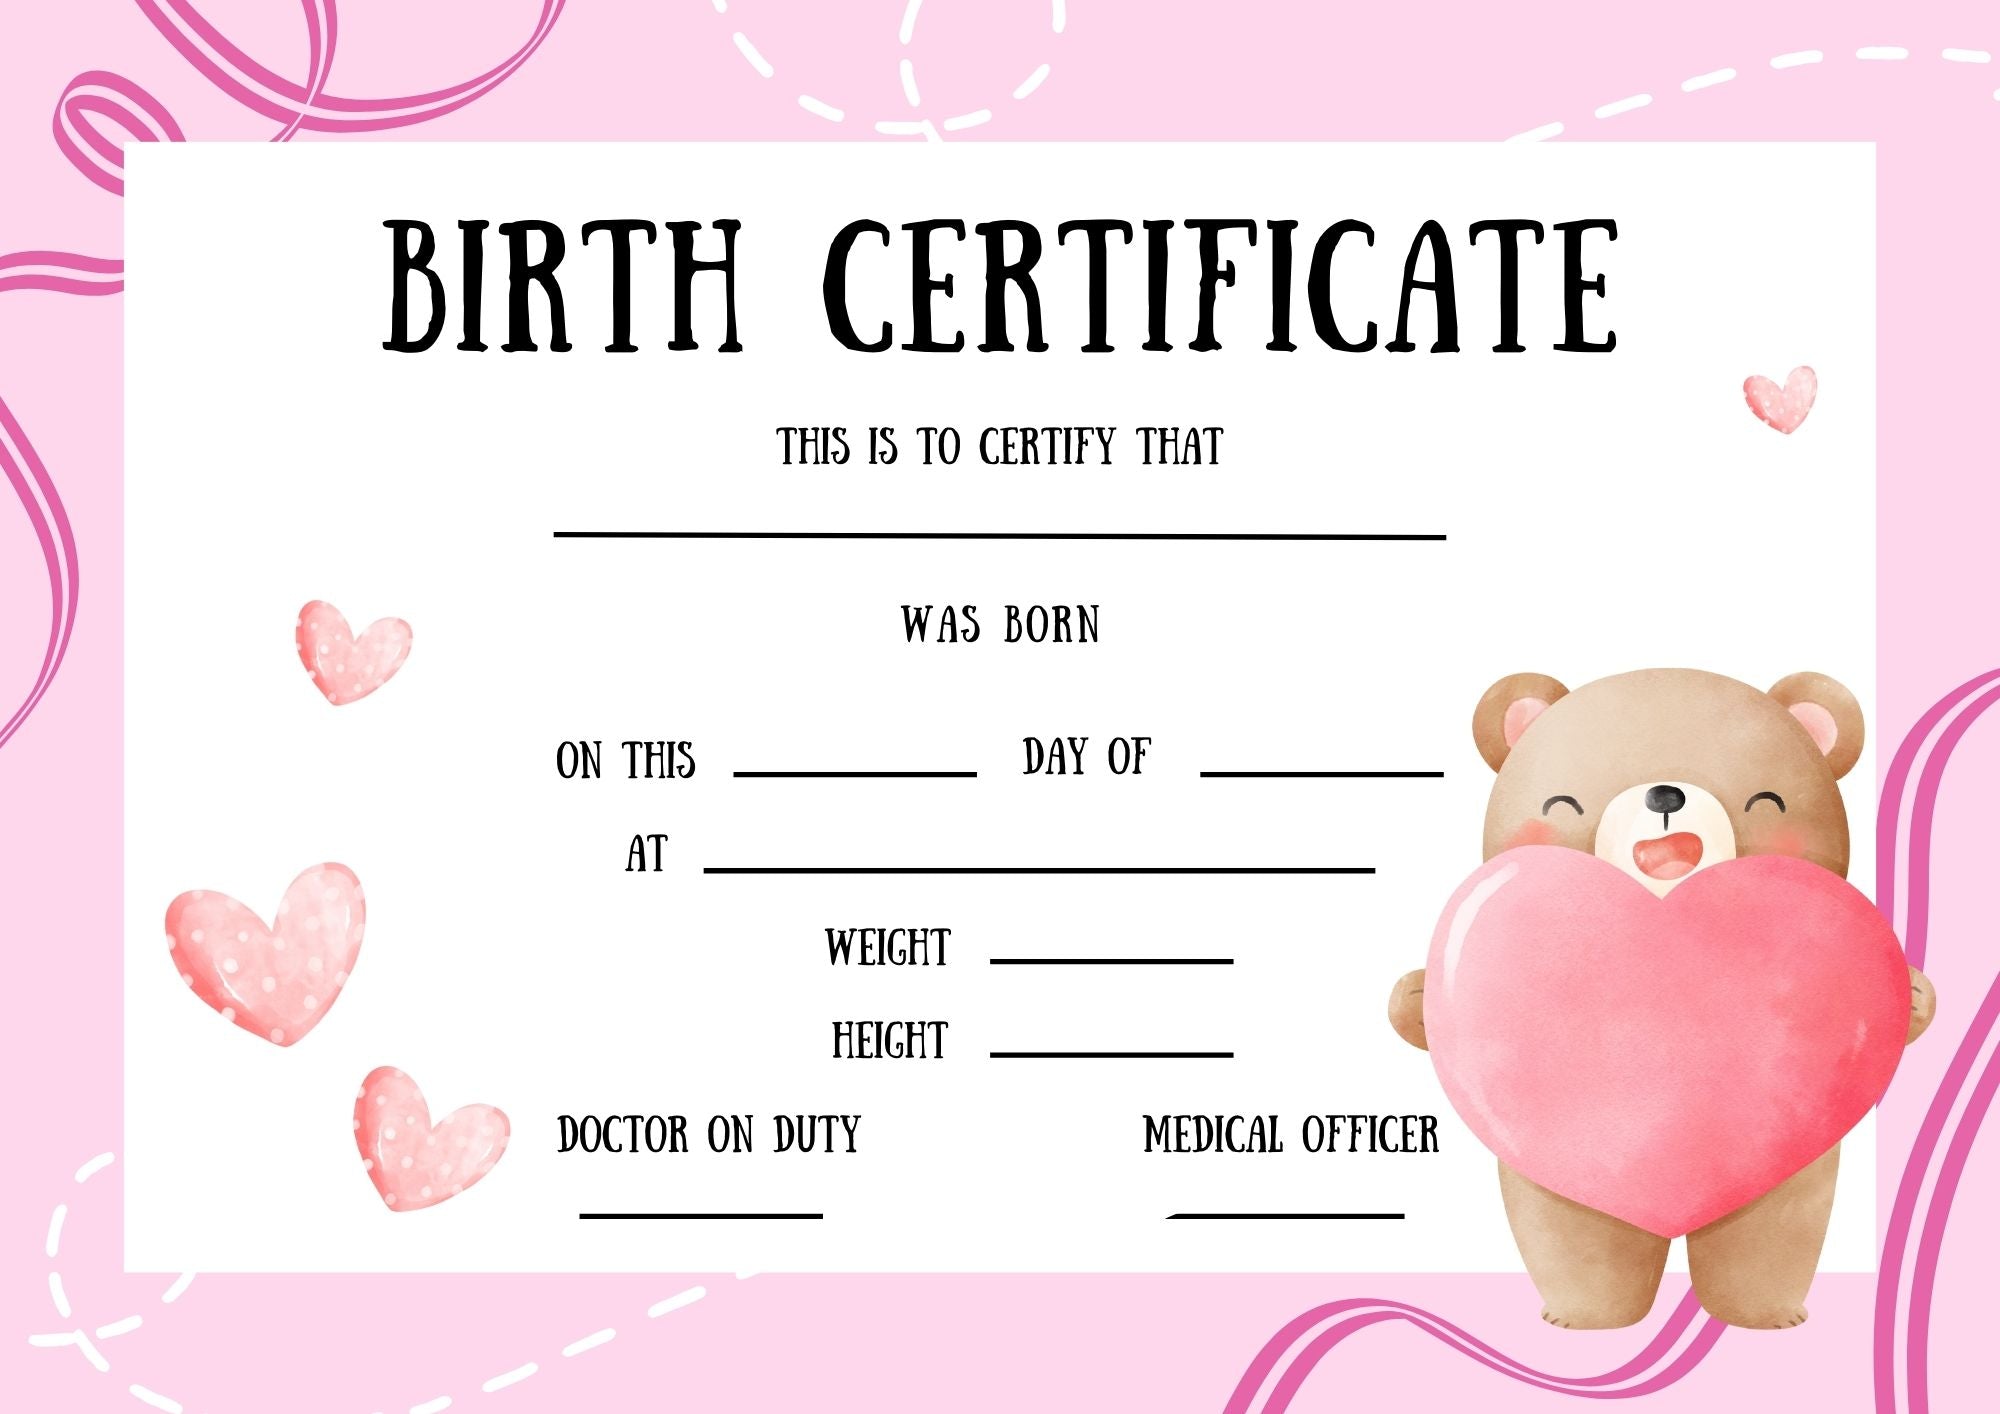 A playful and cute birth certificate template featuring a Brown Patches Bear from The Teddy Factory holding a heart, with spaces for personal details against a pink and white background with heart accents.